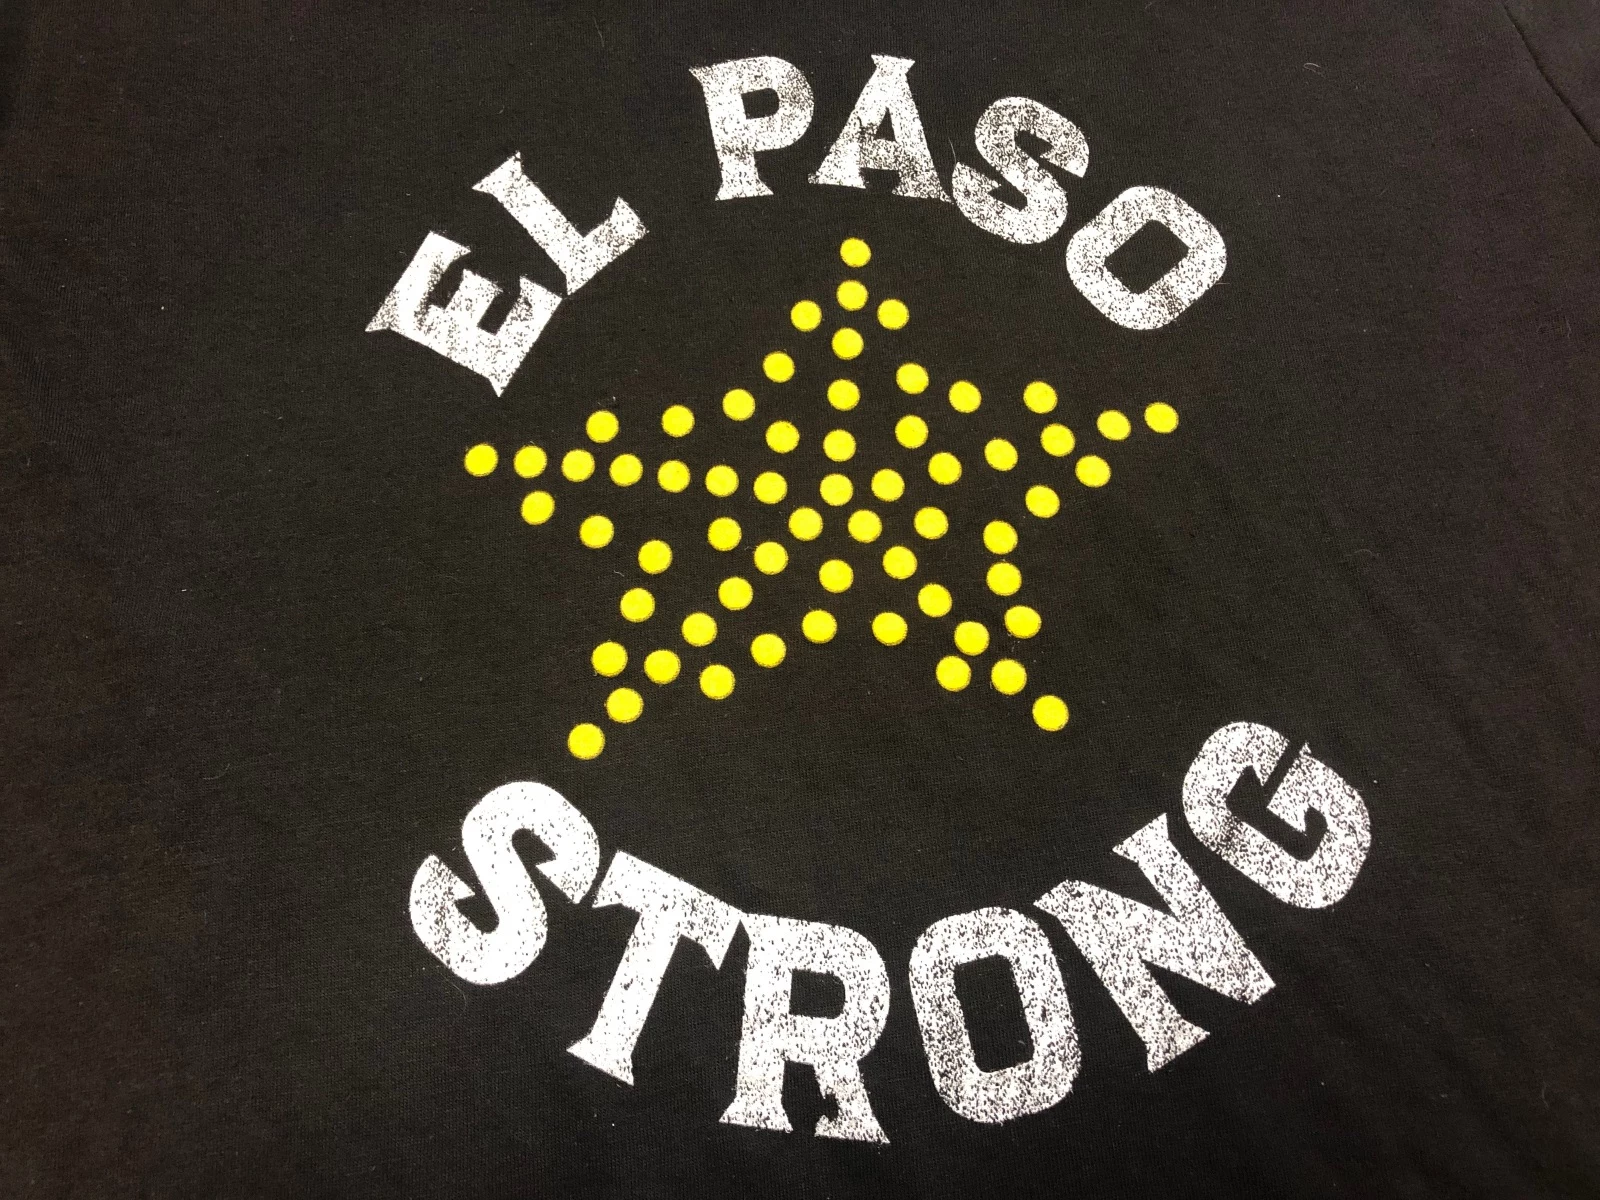 Where To Buy An El Paso Strong T-Shirt